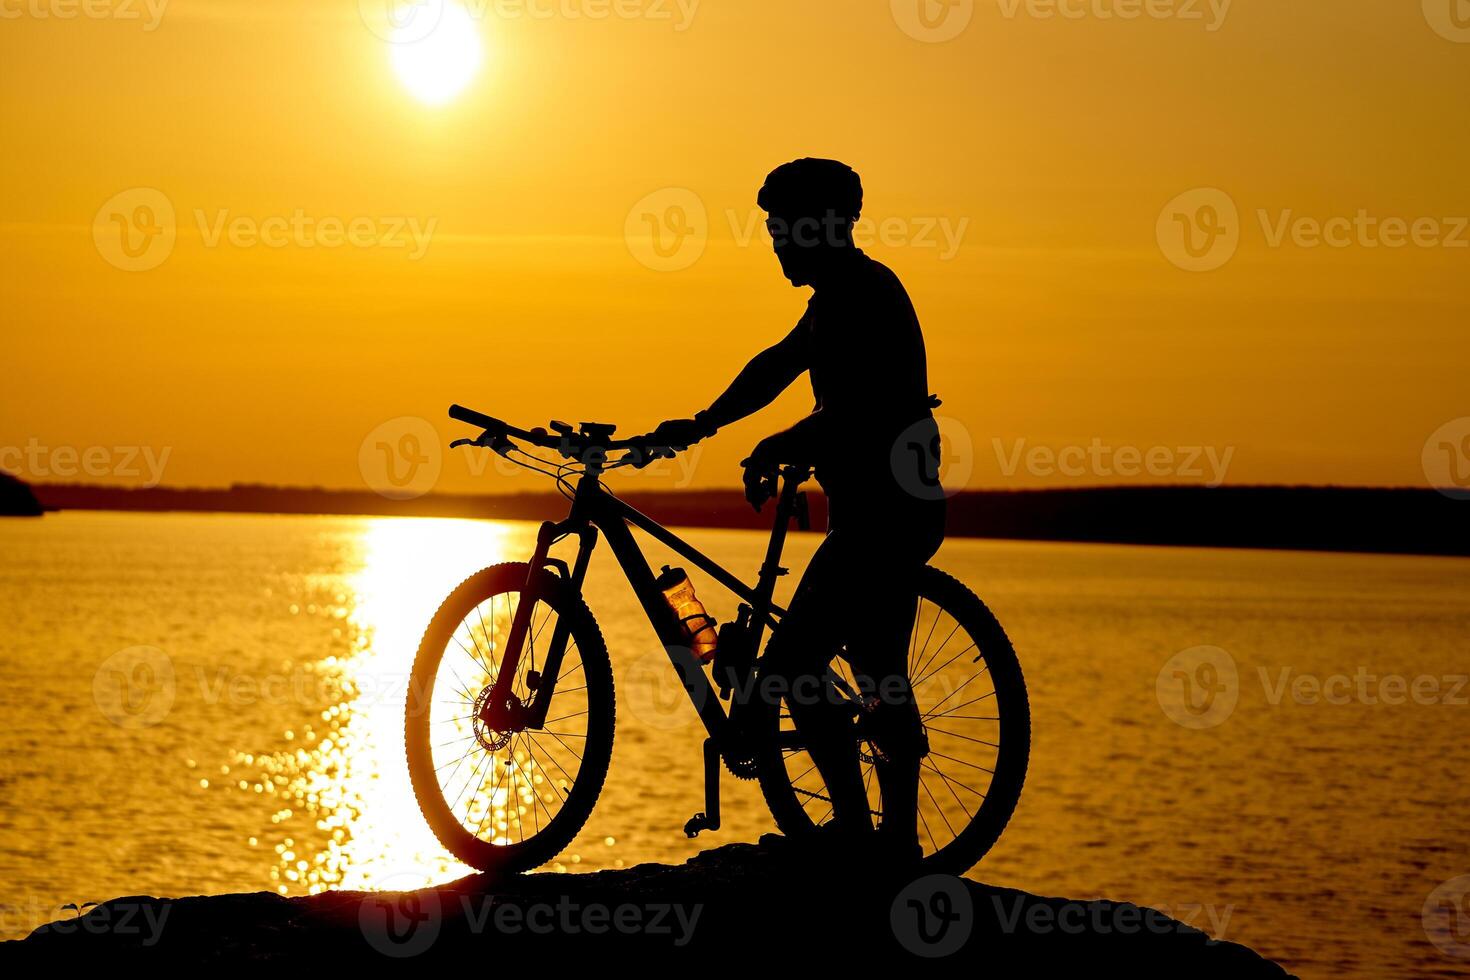 Silhouette of sportsman riding a bicycle on the beach. Colorful sunset cloudy sky in background photo